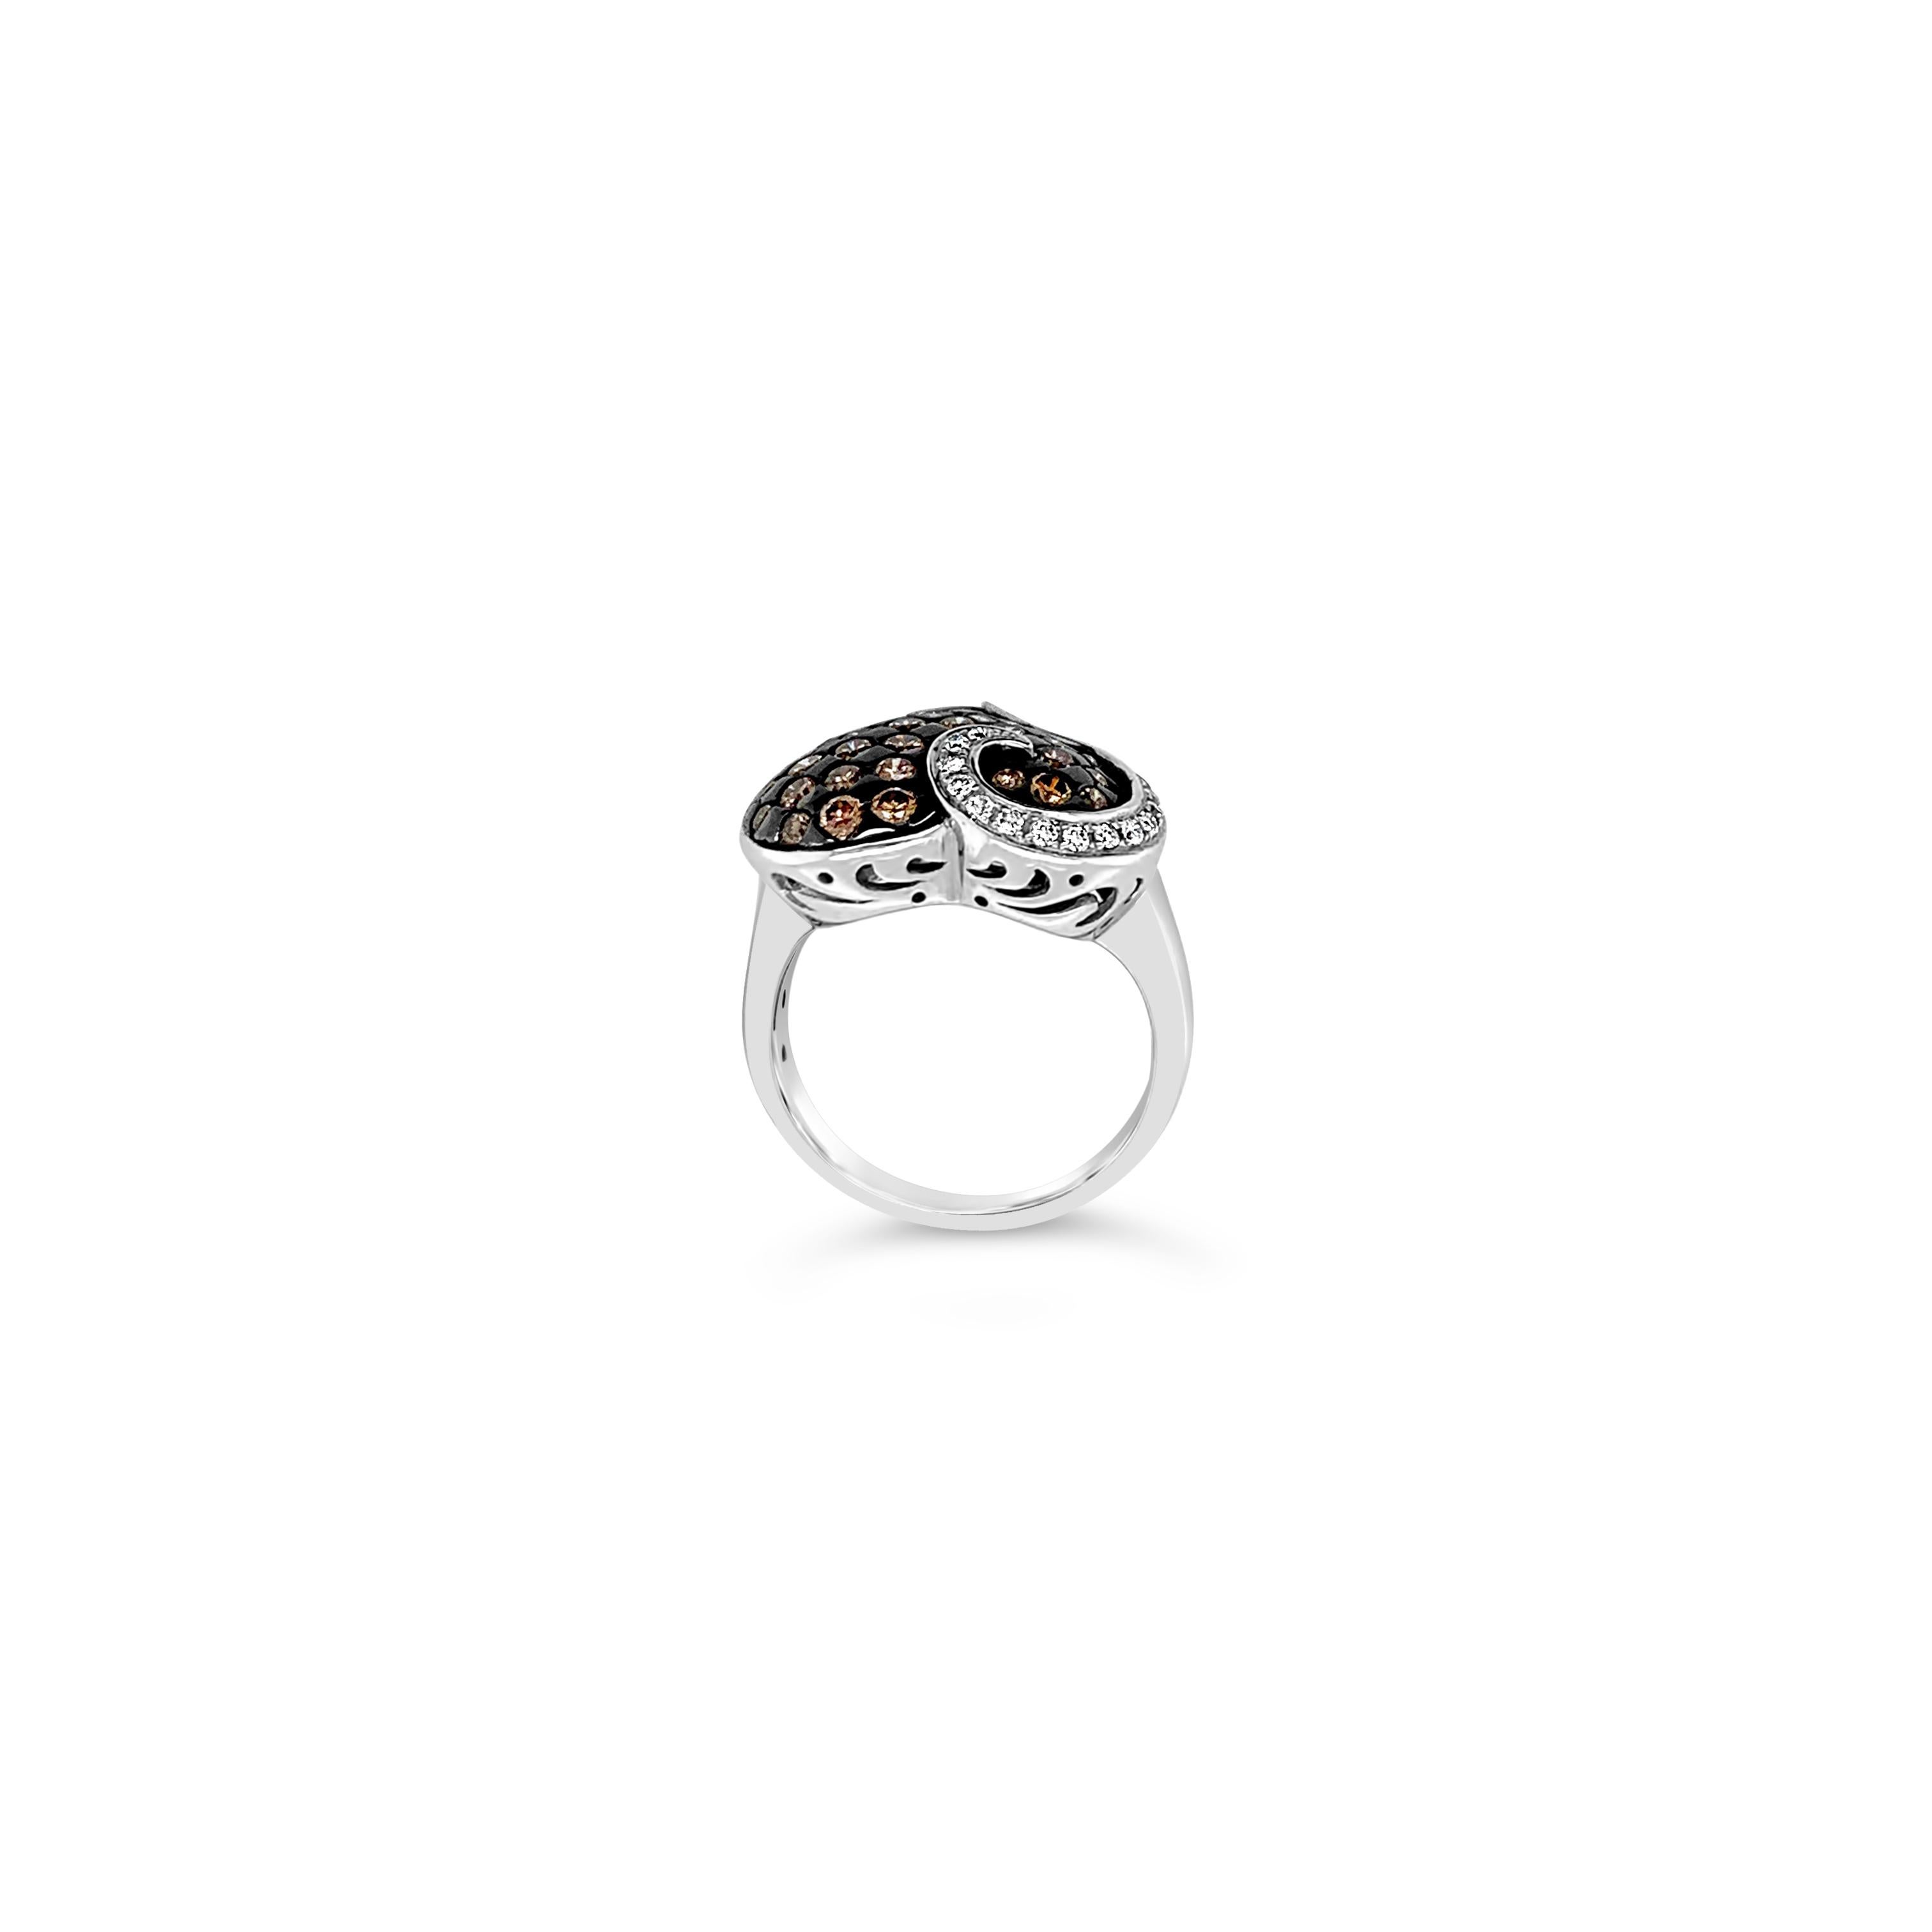 Le Vian® Ring featuring 1.14 cts. Chocolate Diamonds®, .20 cts. Vanilla Diamonds® set in 14K Vanilla Gold®

Diamonds Breakdown:
1.14 cts Brown Diamonds
.20 cts White Diamonds

Gems Breakdown:
None

Ring may or may not be sizable, please feel free to